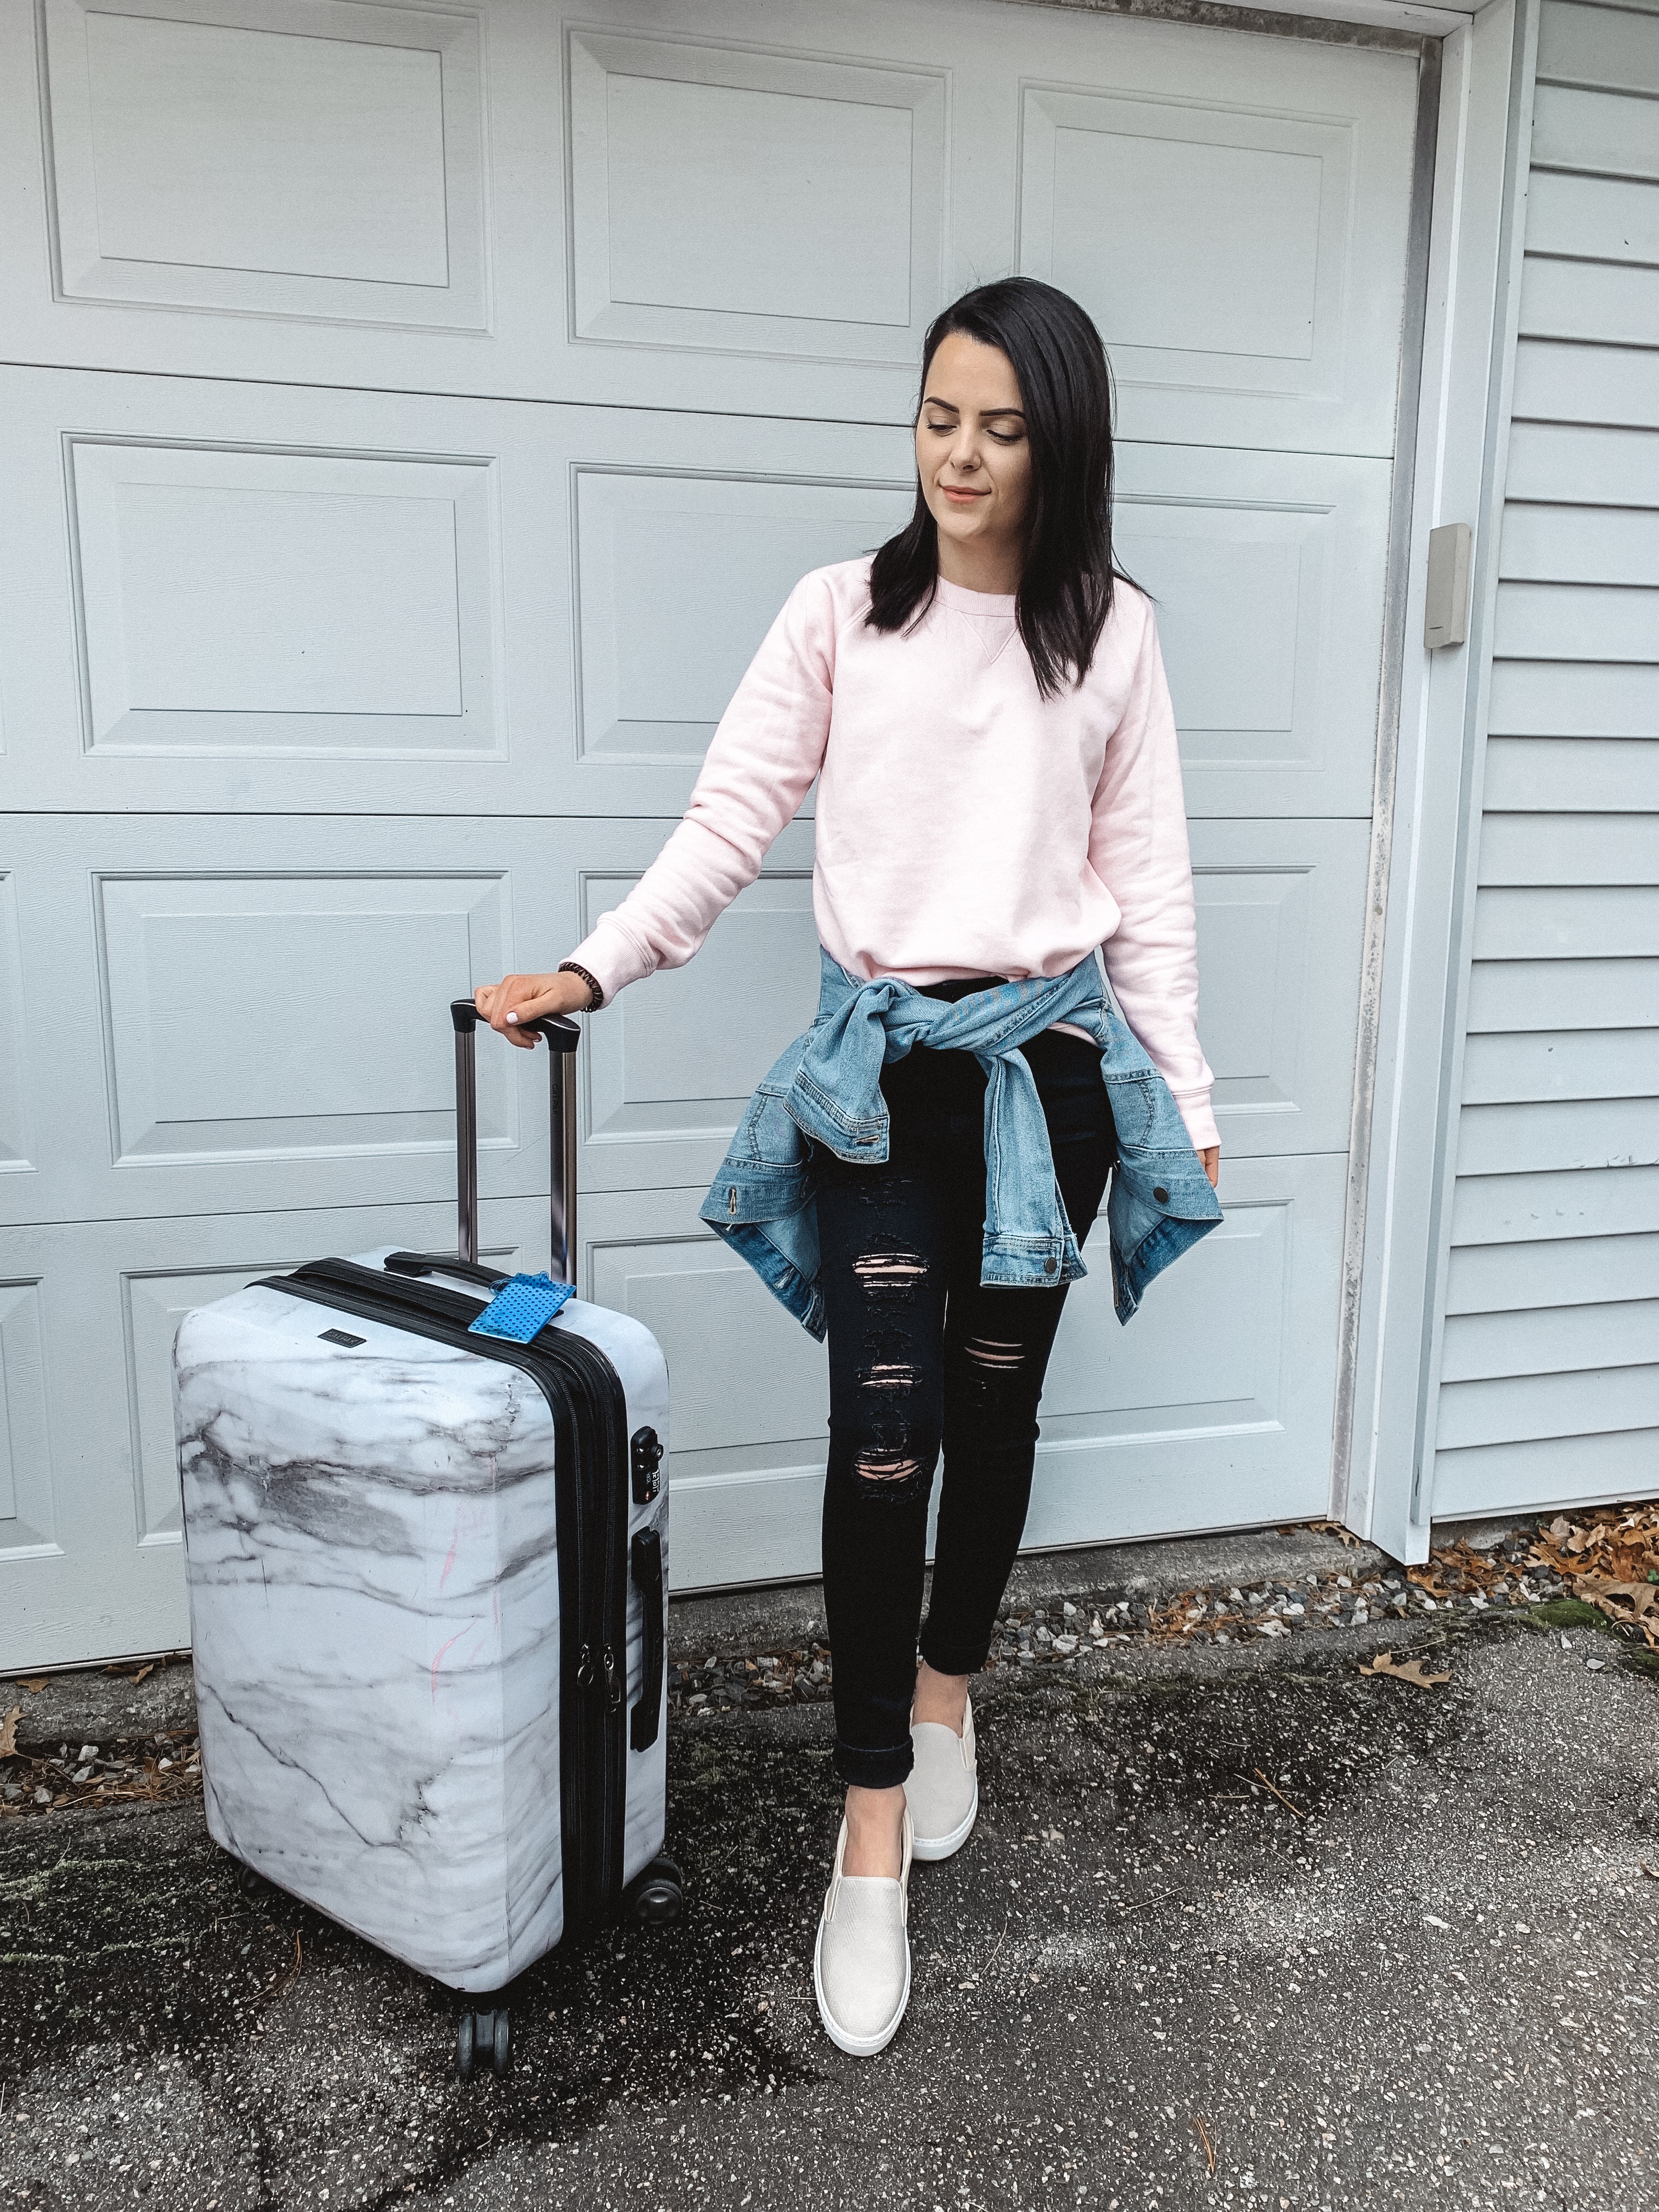 How To Pack A Suitcase